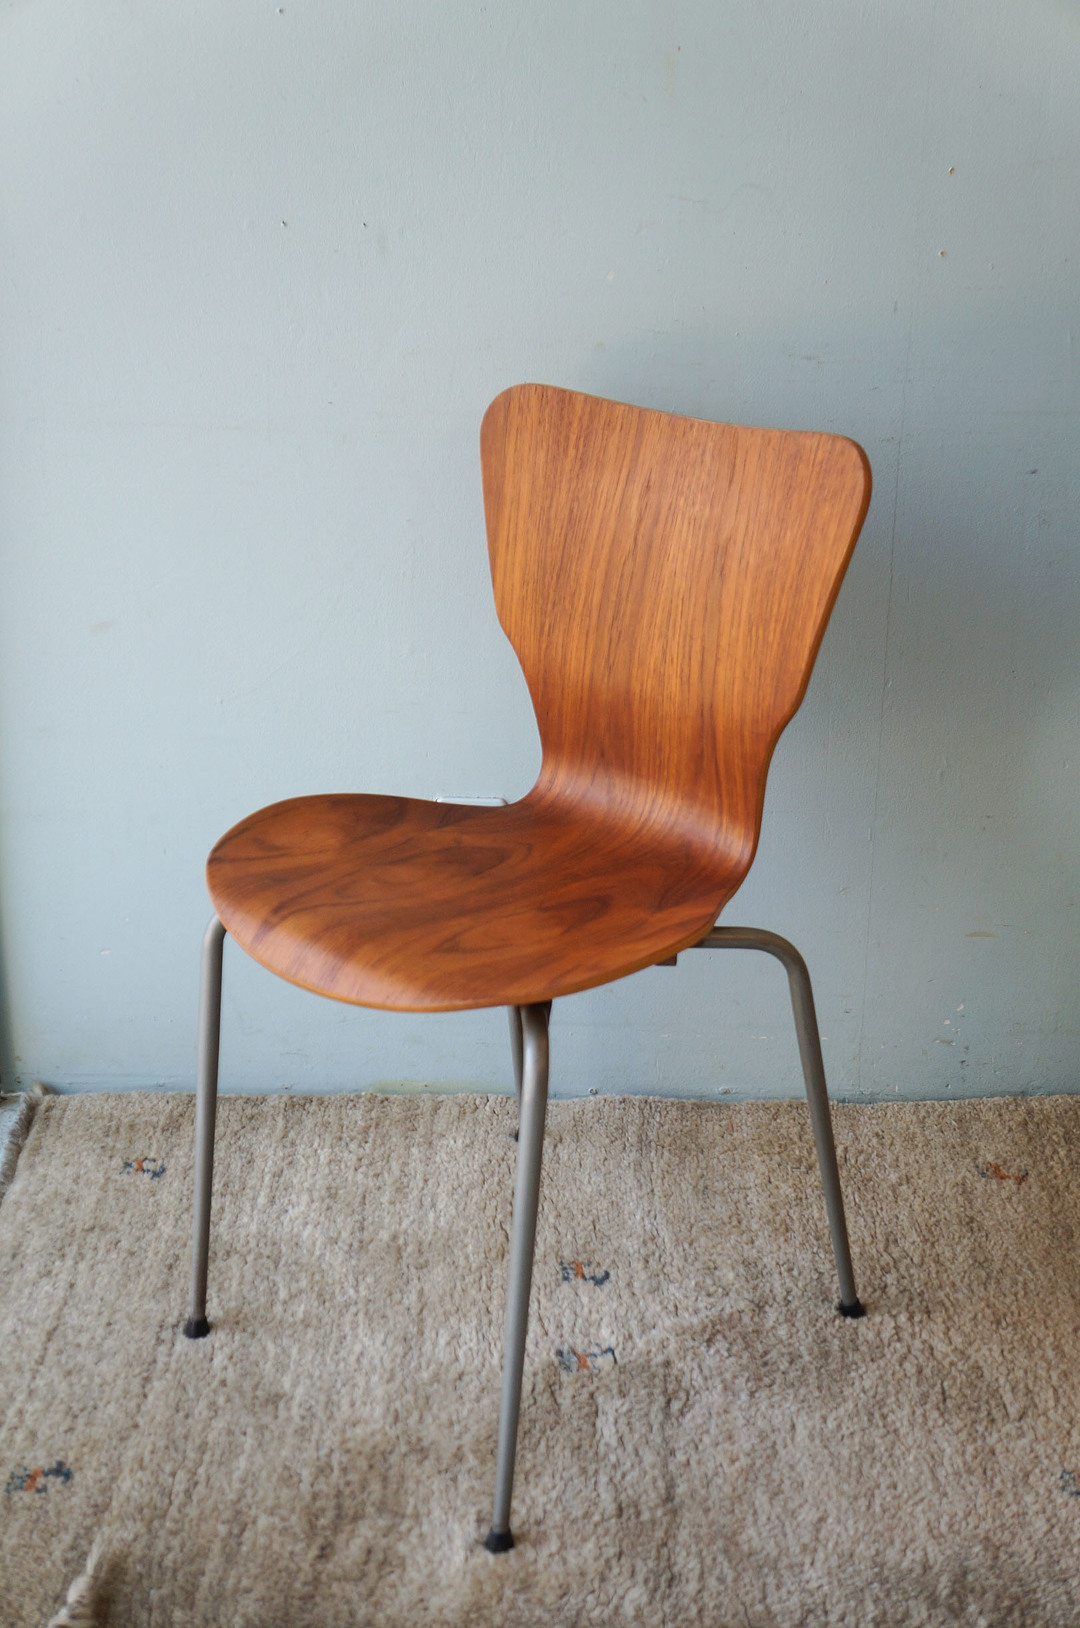 Danish Vintage Teak Plywood Stacking Chair MH Stålmøbler/デンマークヴィンテージ スタッキングチェア チーク材 プライウッド 椅子 ミッドセンチュリー モダン 北欧家具 5